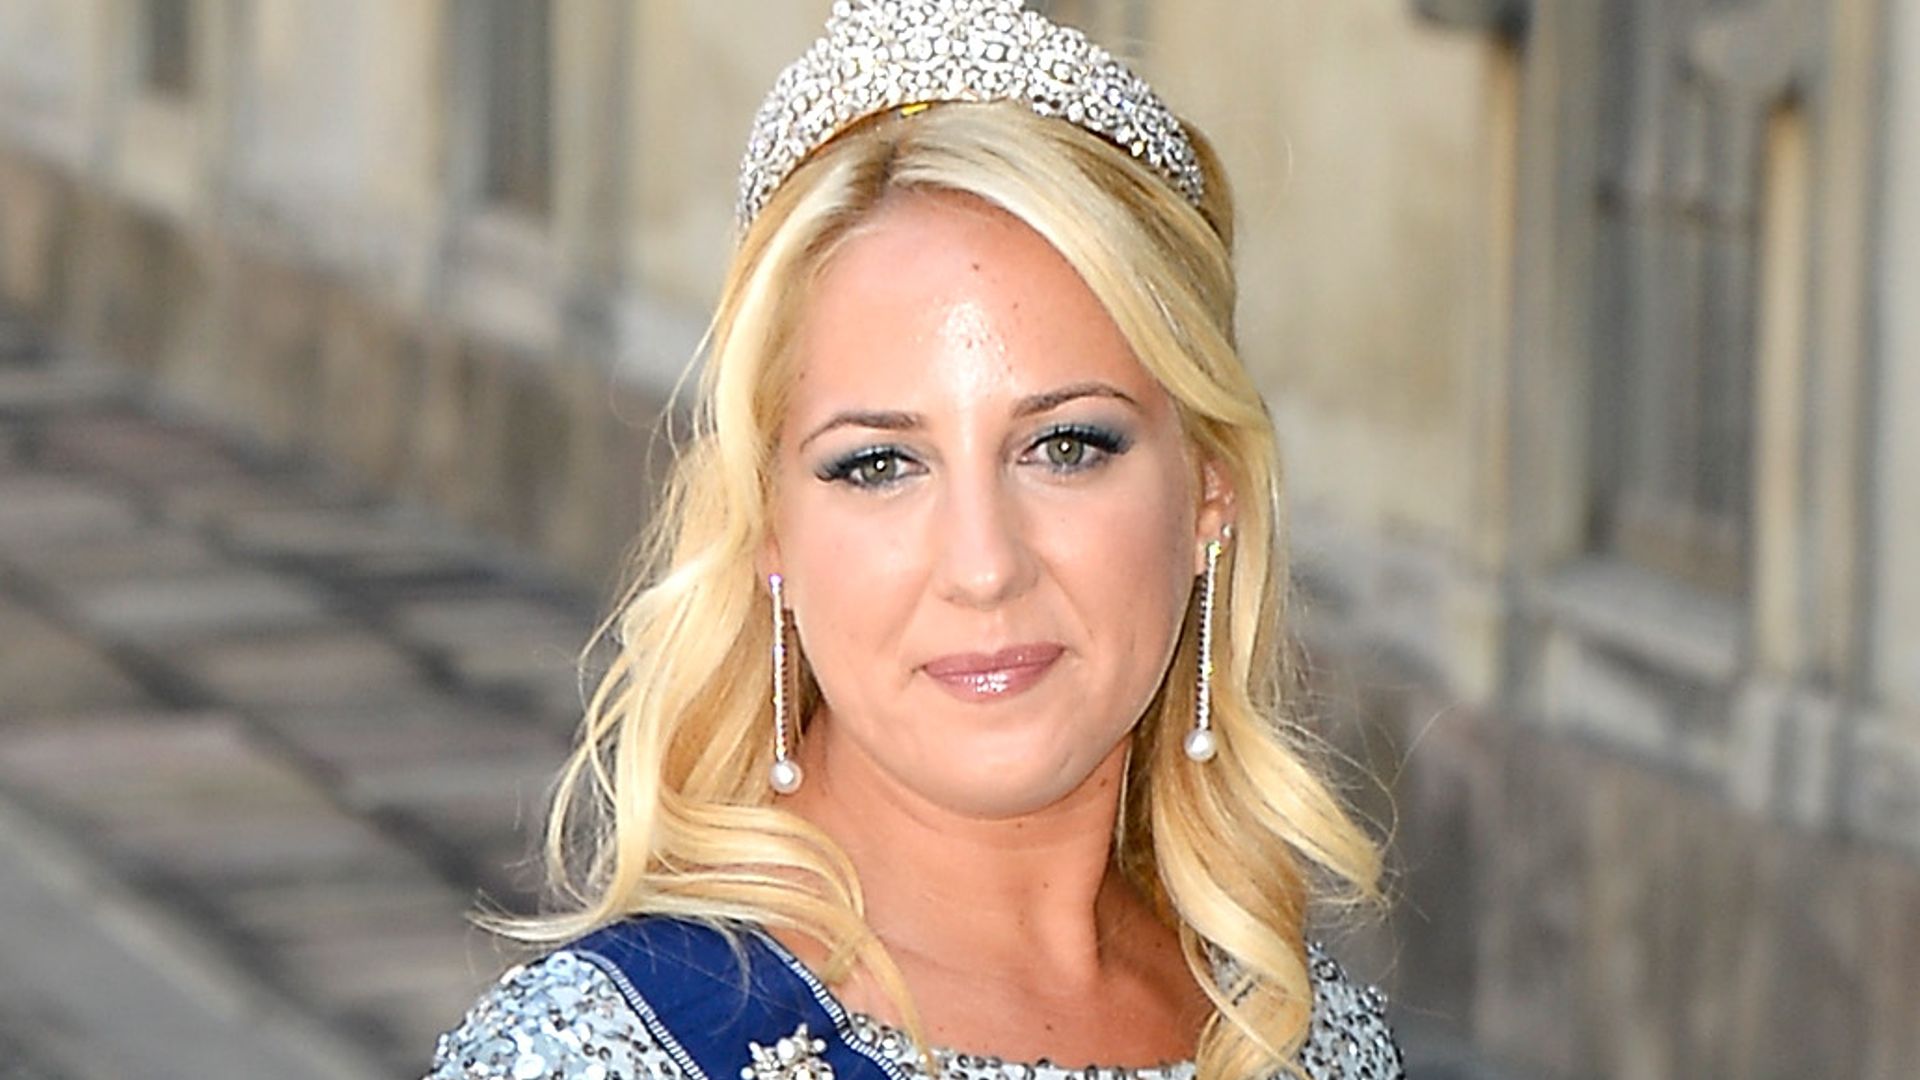 Princess Theodora of Greece in a sparkly dress and tiara